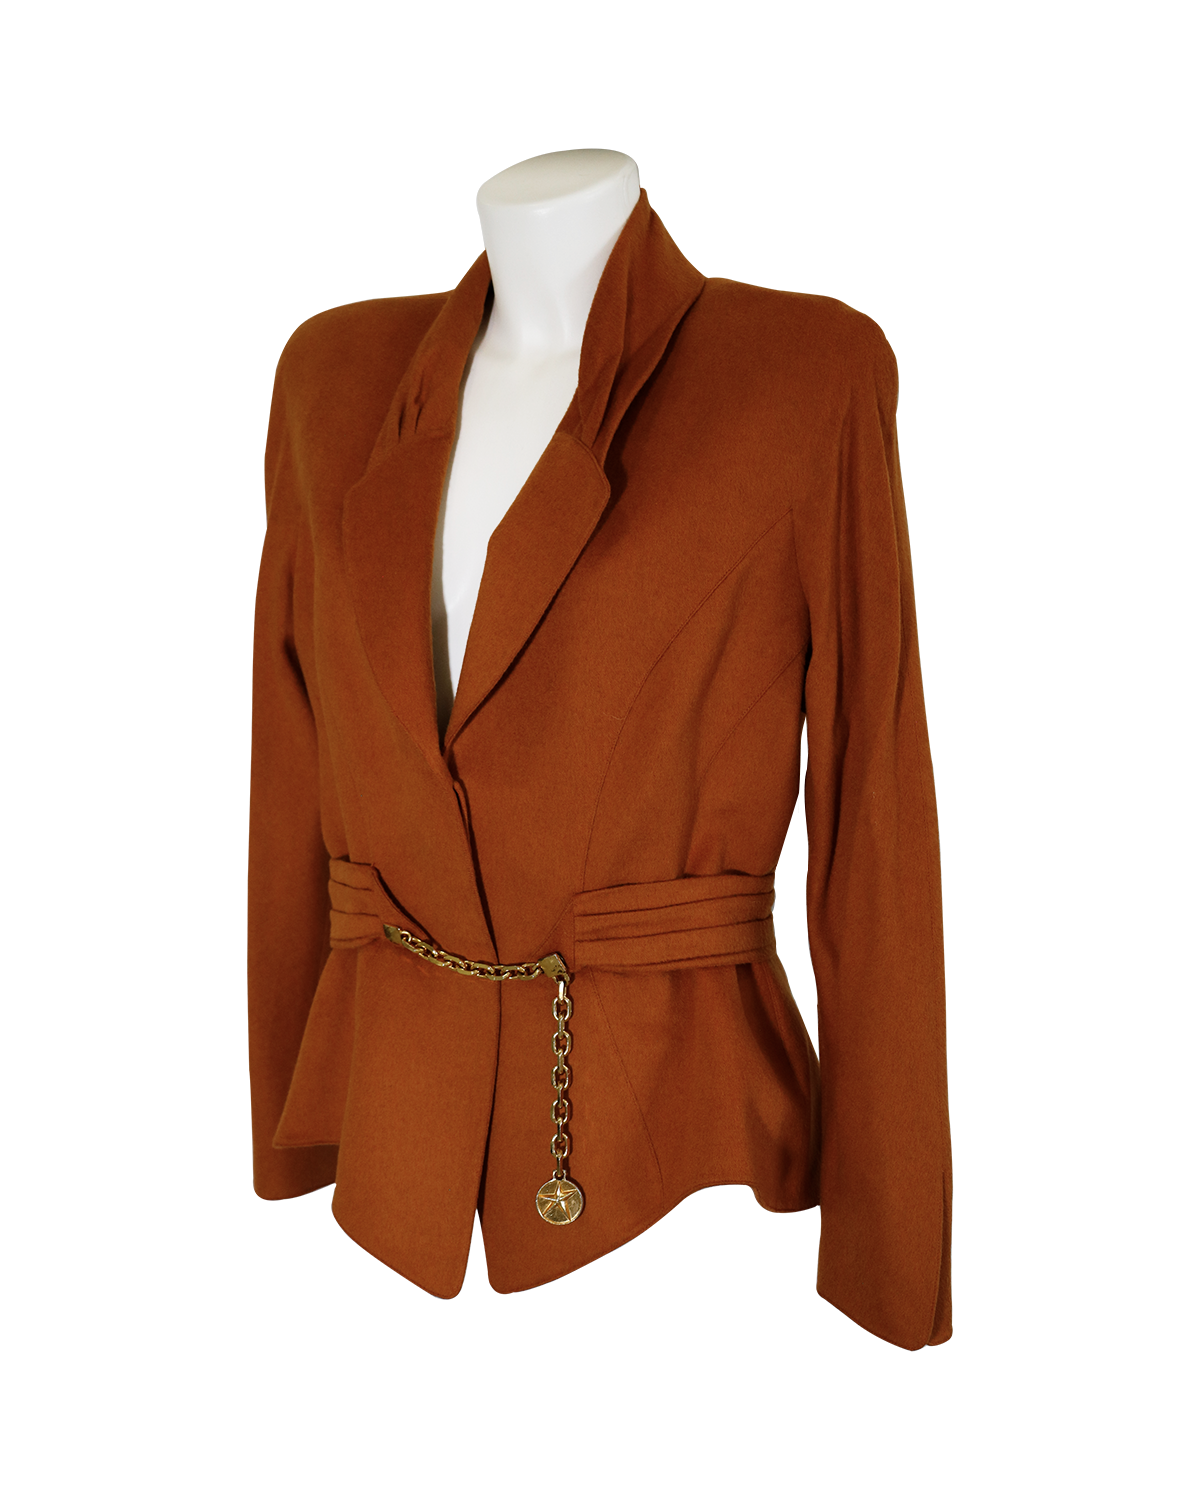 Thierry Mugler Wool Jacket from 1980s